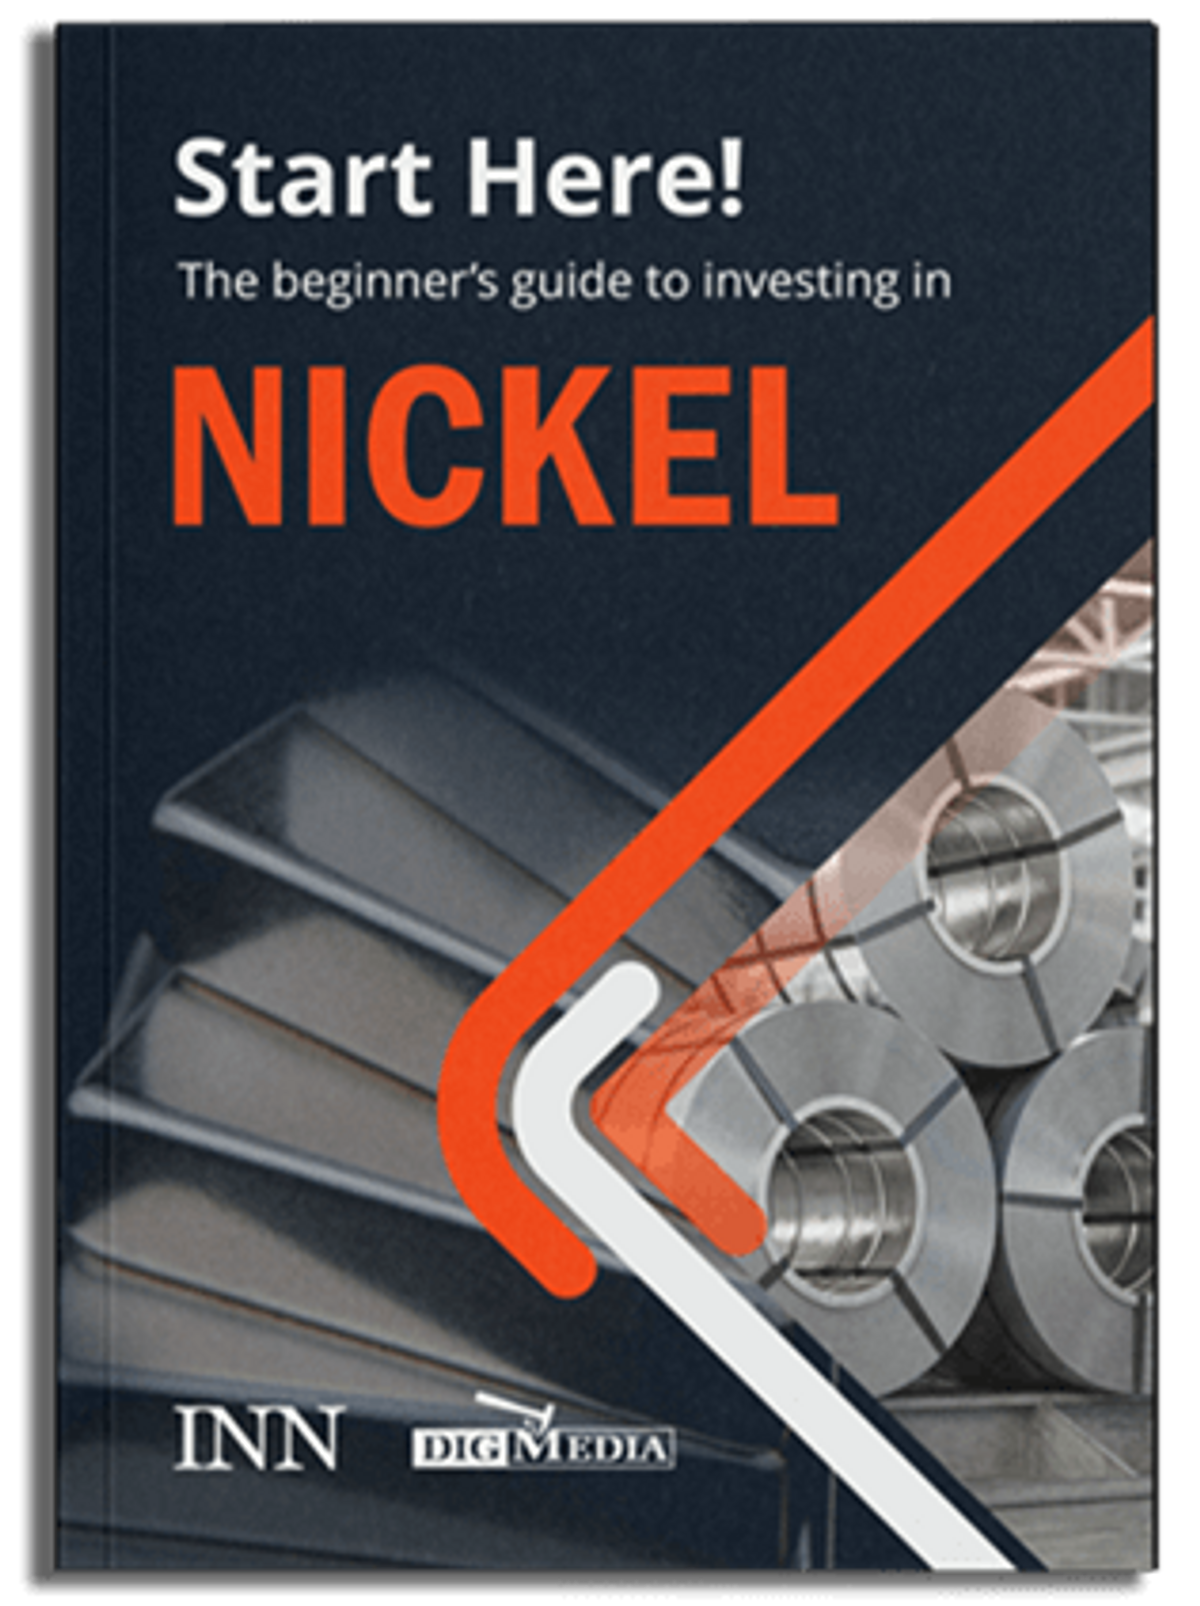 The Beginner's Guide to Investing in Nickel